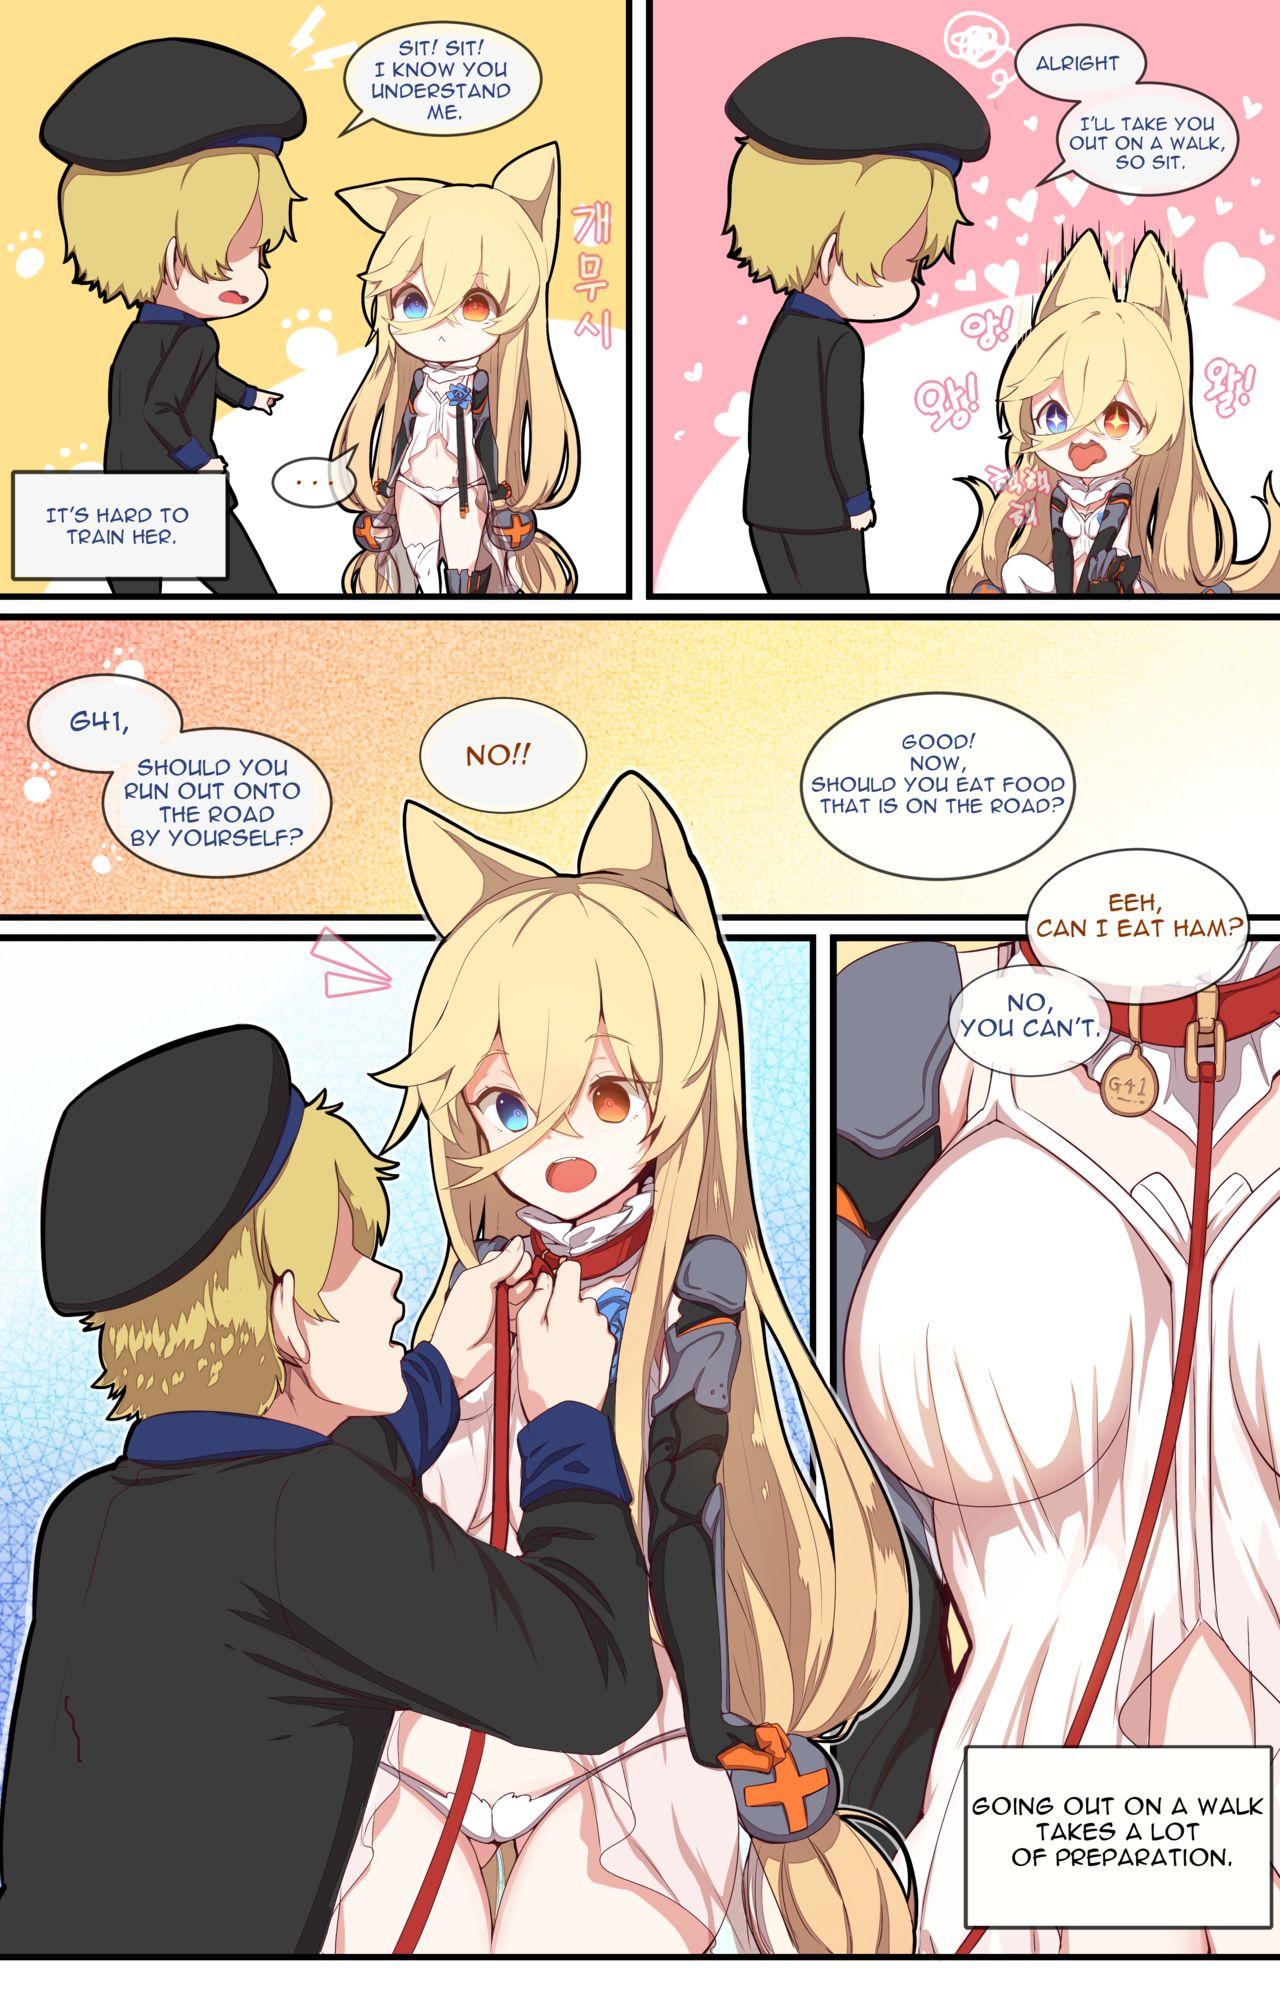 Car How to Use Dolls 04 - Girls frontline Teen - Page 3